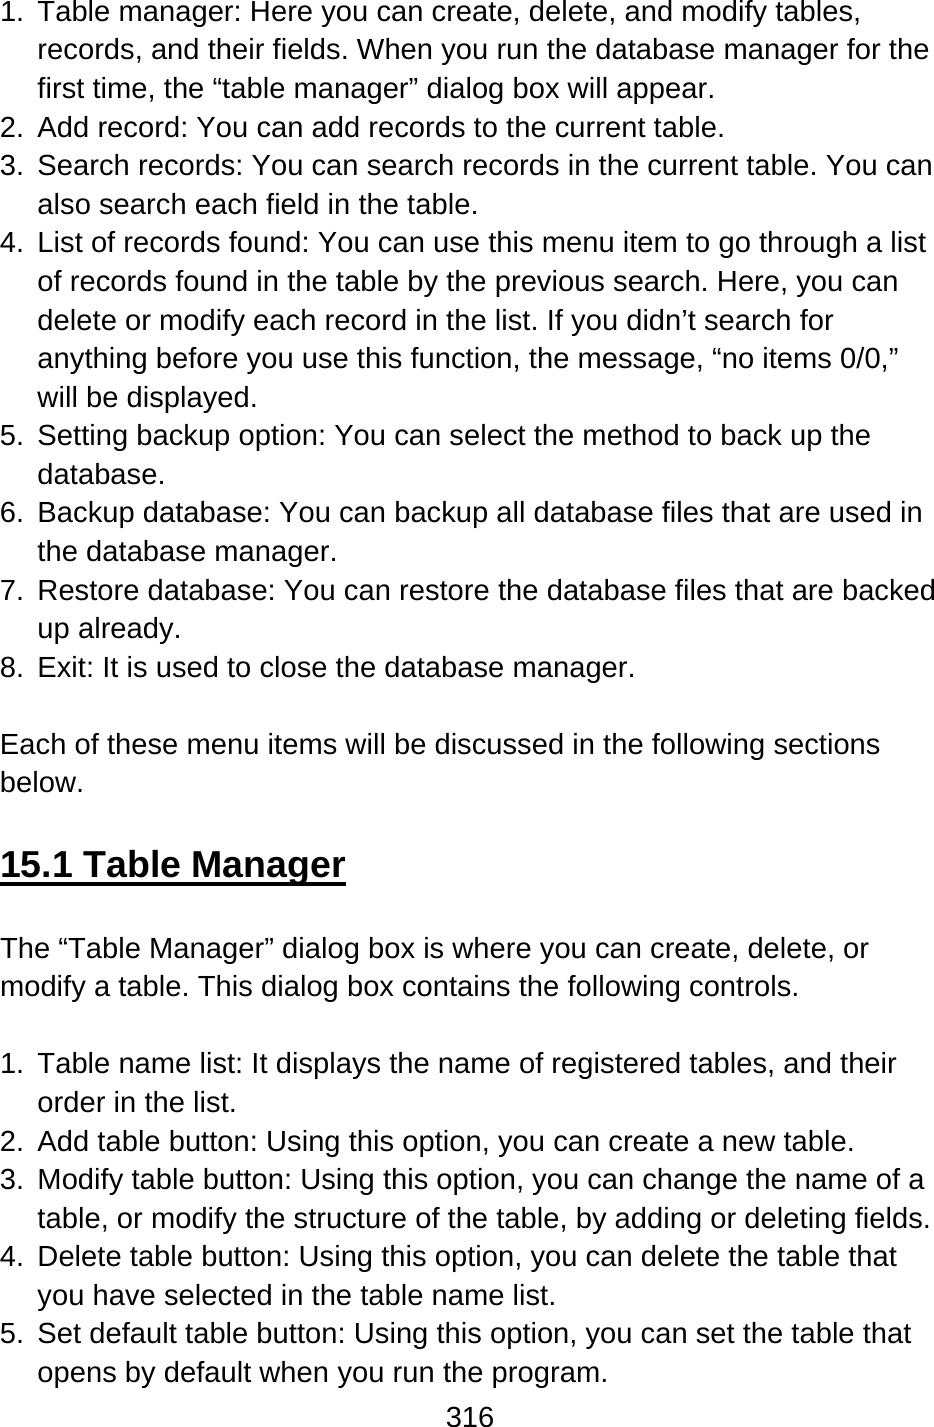 316  1.  Table manager: Here you can create, delete, and modify tables, records, and their fields. When you run the database manager for the first time, the “table manager” dialog box will appear. 2.  Add record: You can add records to the current table. 3.  Search records: You can search records in the current table. You can also search each field in the table. 4.  List of records found: You can use this menu item to go through a list of records found in the table by the previous search. Here, you can delete or modify each record in the list. If you didn’t search for anything before you use this function, the message, “no items 0/0,” will be displayed. 5.  Setting backup option: You can select the method to back up the database. 6.  Backup database: You can backup all database files that are used in the database manager. 7.  Restore database: You can restore the database files that are backed up already. 8.  Exit: It is used to close the database manager.  Each of these menu items will be discussed in the following sections below.  15.1 Table Manager  The “Table Manager” dialog box is where you can create, delete, or modify a table. This dialog box contains the following controls.  1.  Table name list: It displays the name of registered tables, and their order in the list. 2.  Add table button: Using this option, you can create a new table. 3.  Modify table button: Using this option, you can change the name of a table, or modify the structure of the table, by adding or deleting fields. 4.  Delete table button: Using this option, you can delete the table that you have selected in the table name list. 5.  Set default table button: Using this option, you can set the table that opens by default when you run the program. 